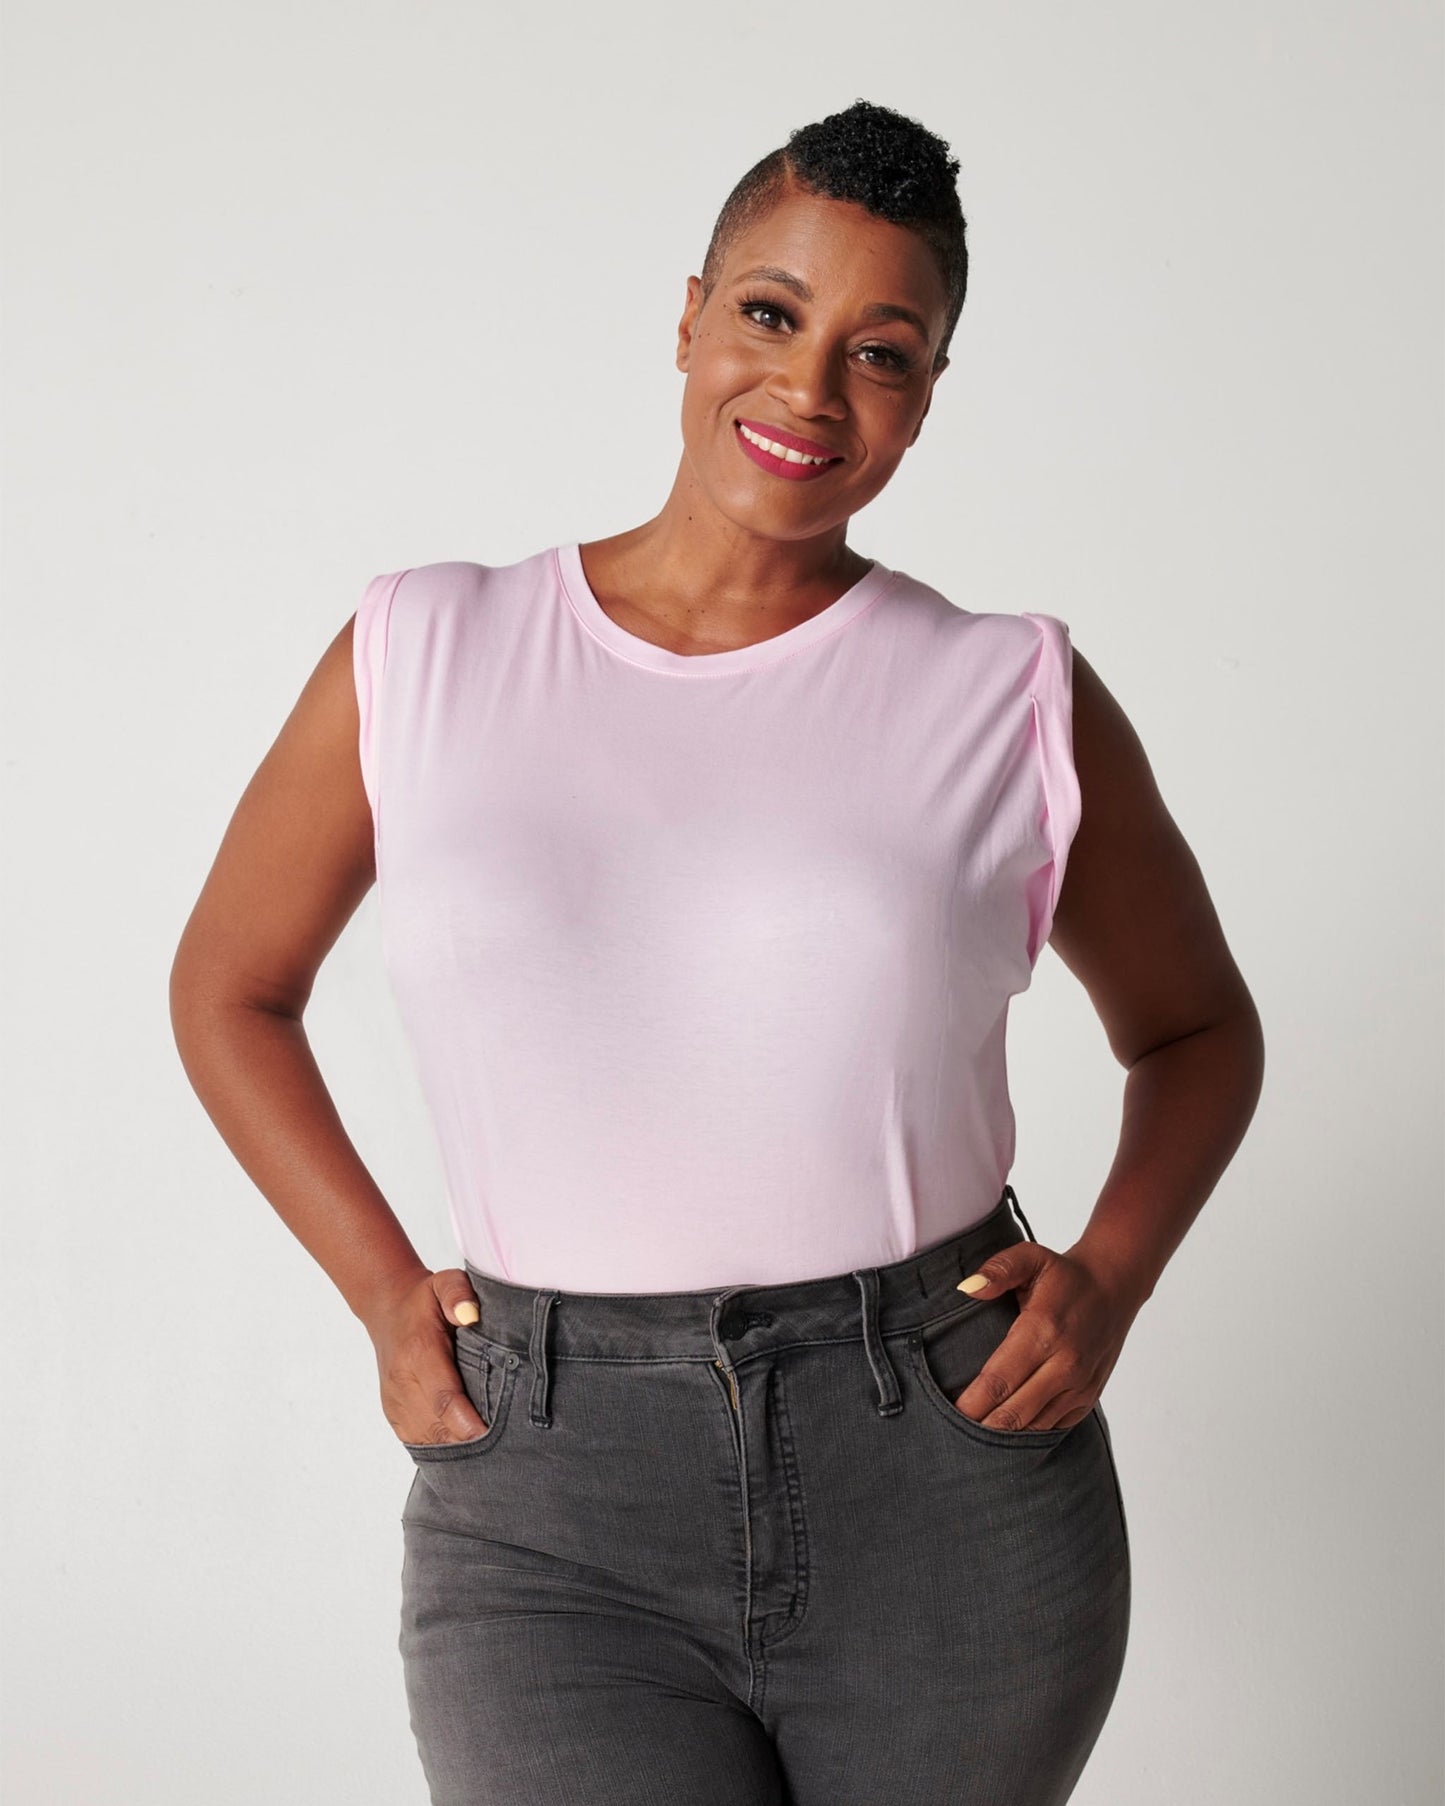 Pink pima cotton muscle tee on smiling black model wearing black jeans with hands in pockets